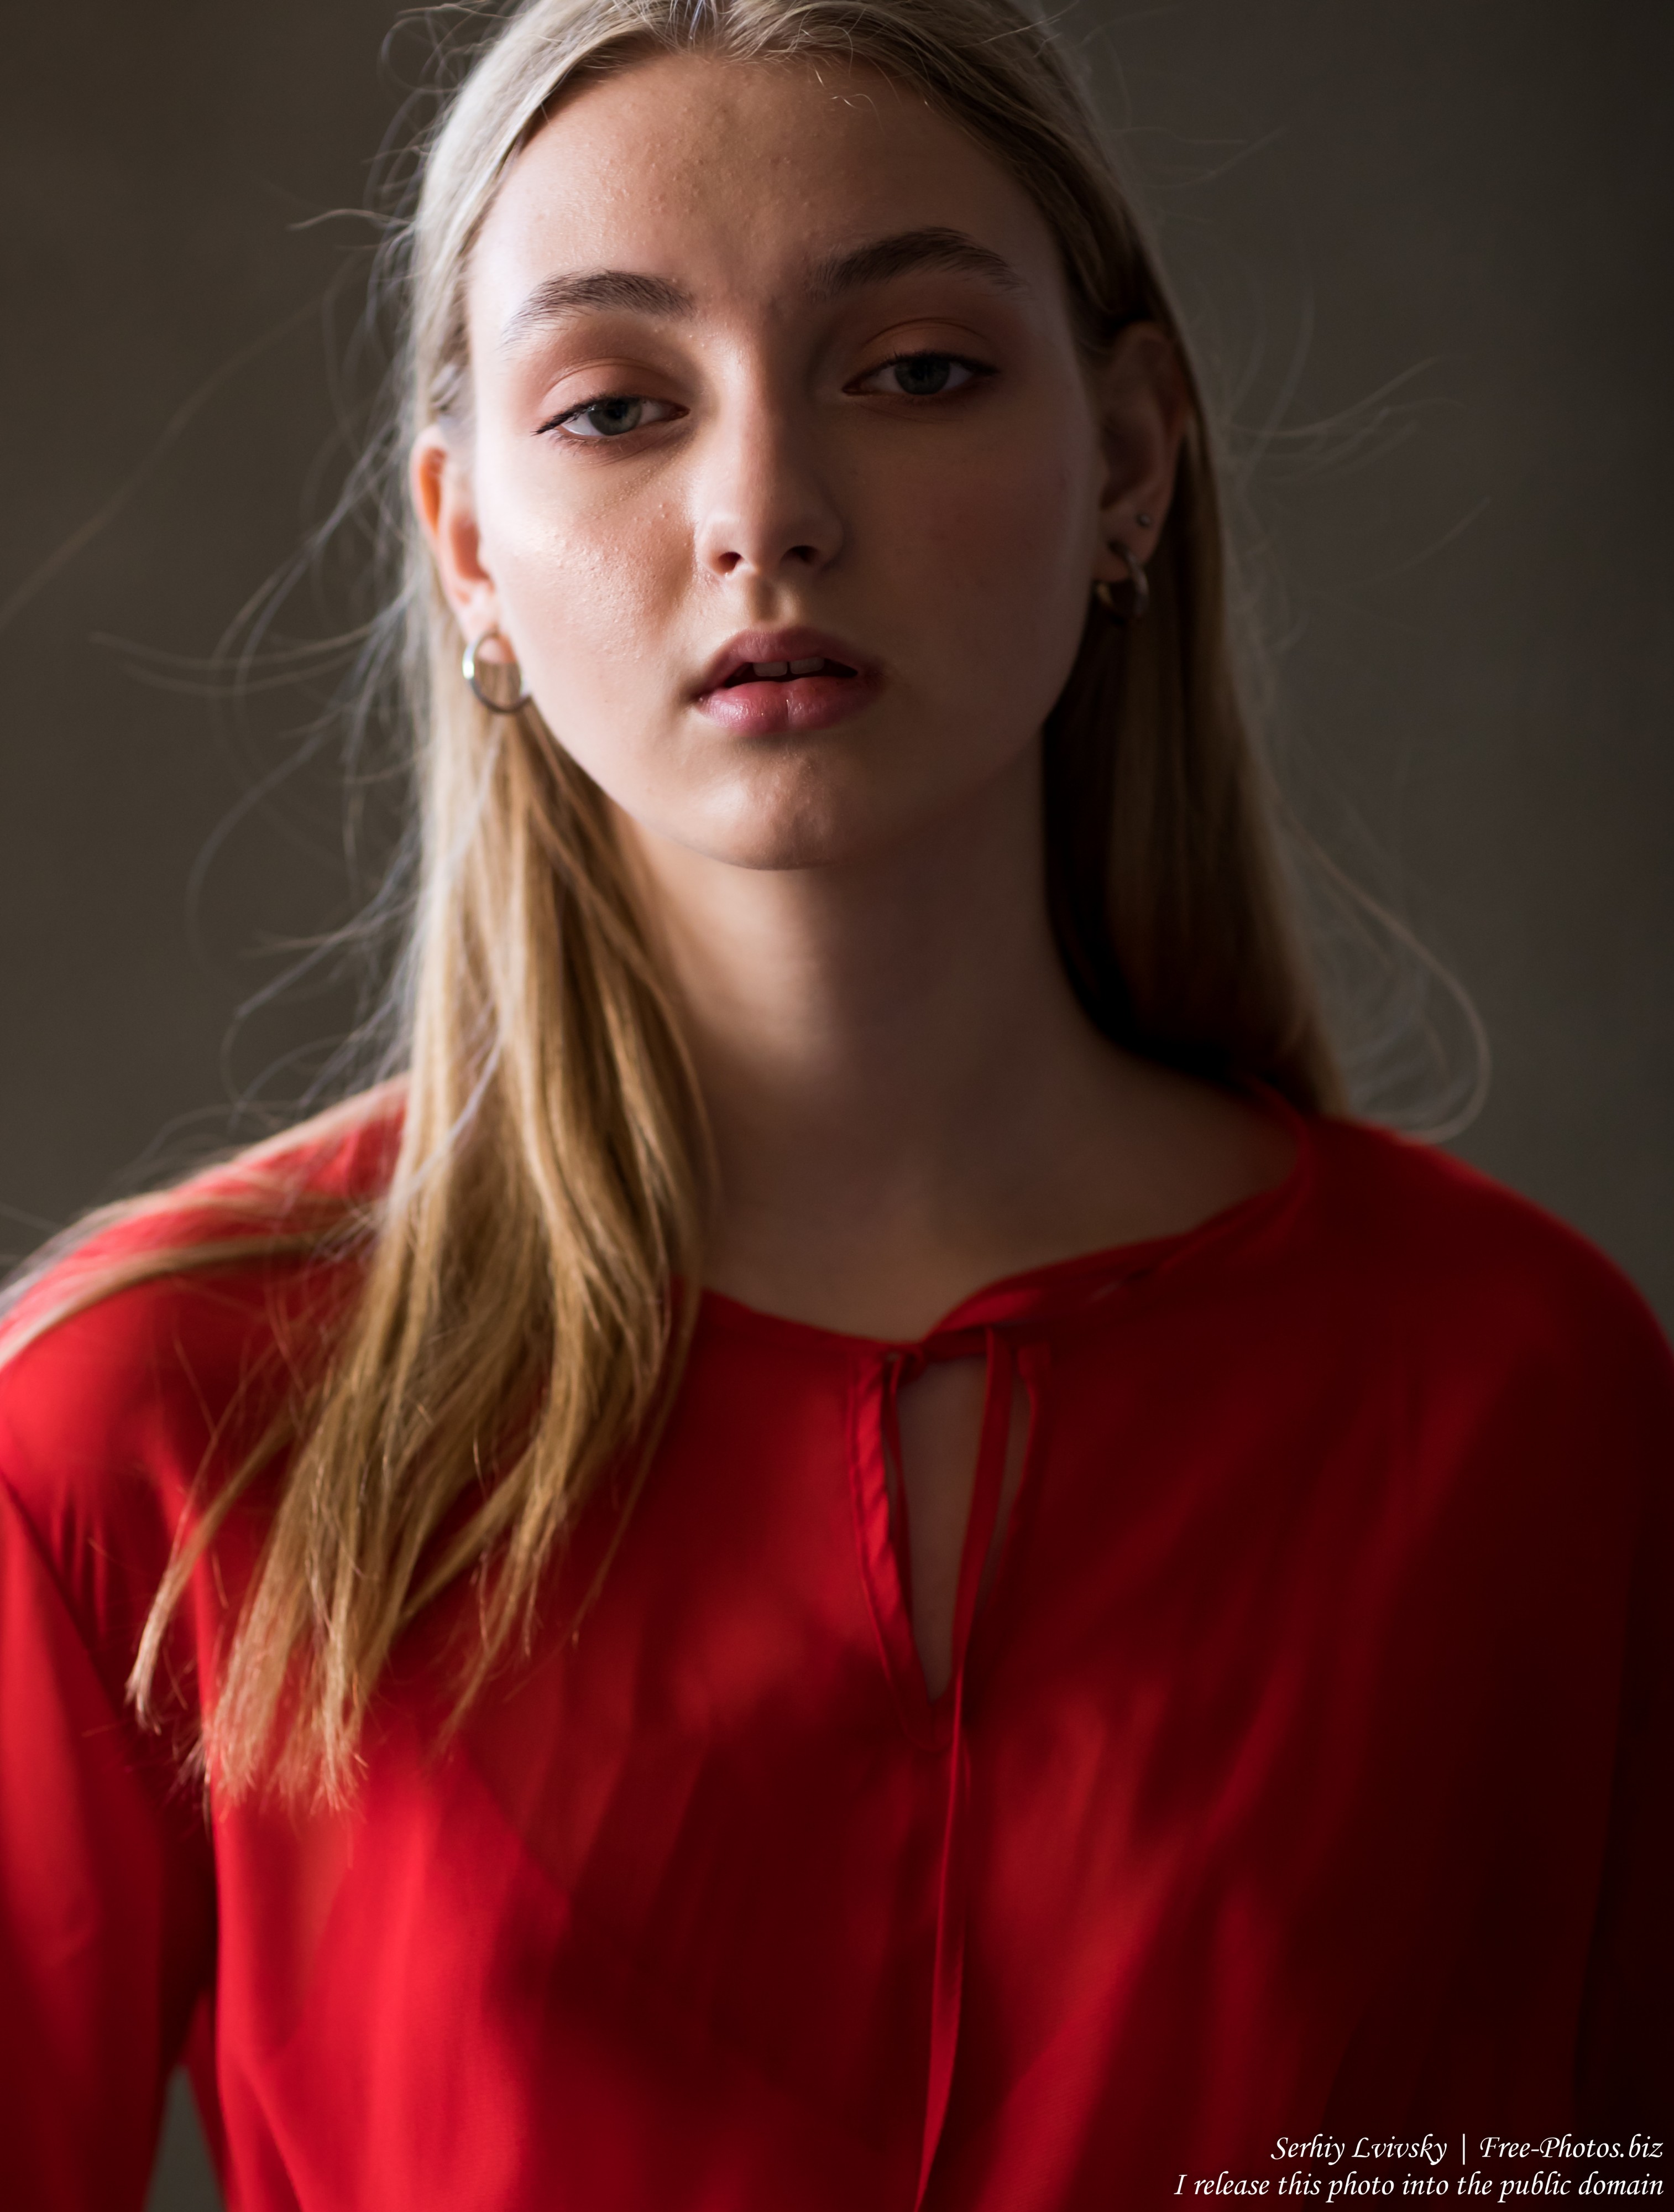 Nastia - a 16-year-old natural blonde girl photographed in September 2019 by Serhiy Lvivsky, picture 18